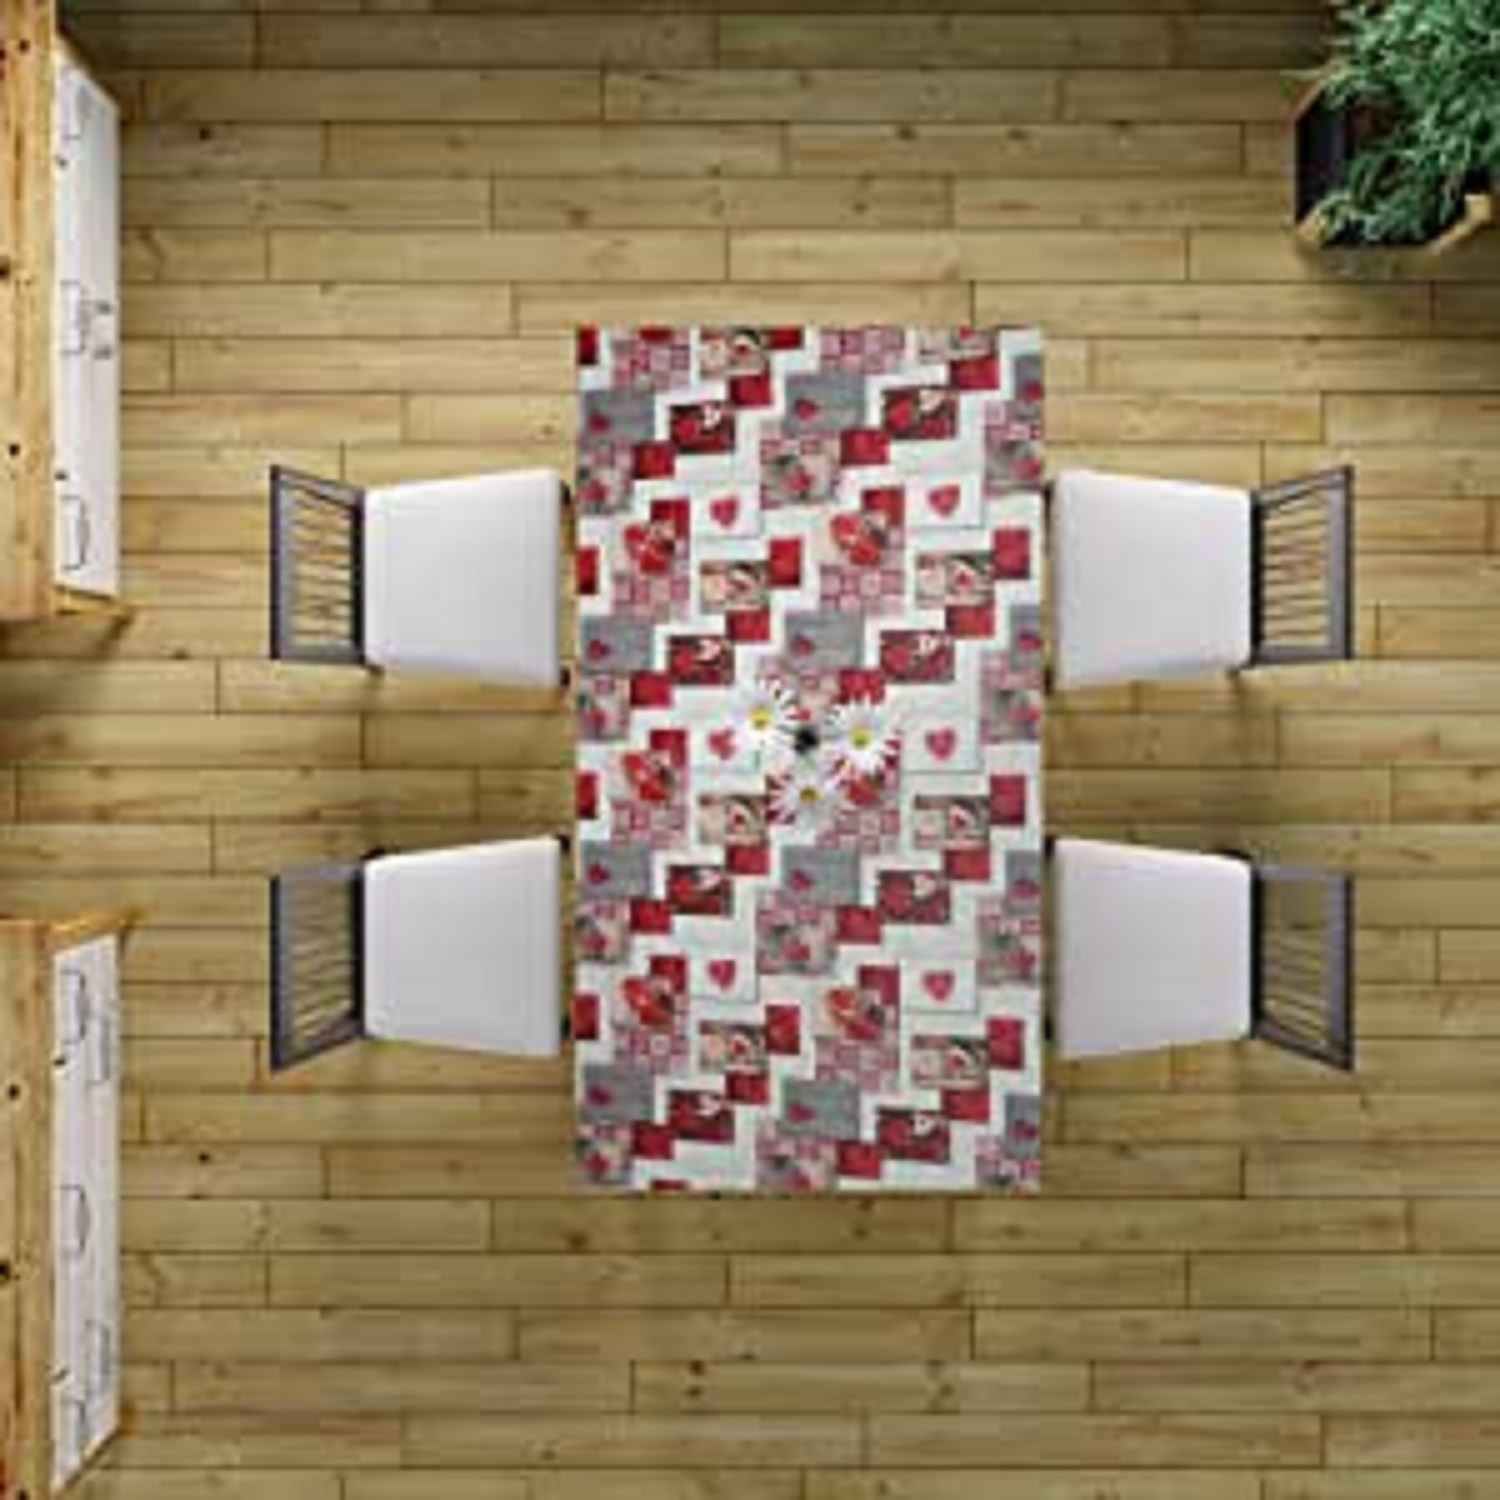 Printed Table Cloth, Pvc With Polyester Backing, Rf10205 - Highly Durable Design, Table Cover For Dining Room Kitchen Birthday Parties Holiday Wedding Indoor Outside, Rectangle, 1.37X20M/Roll